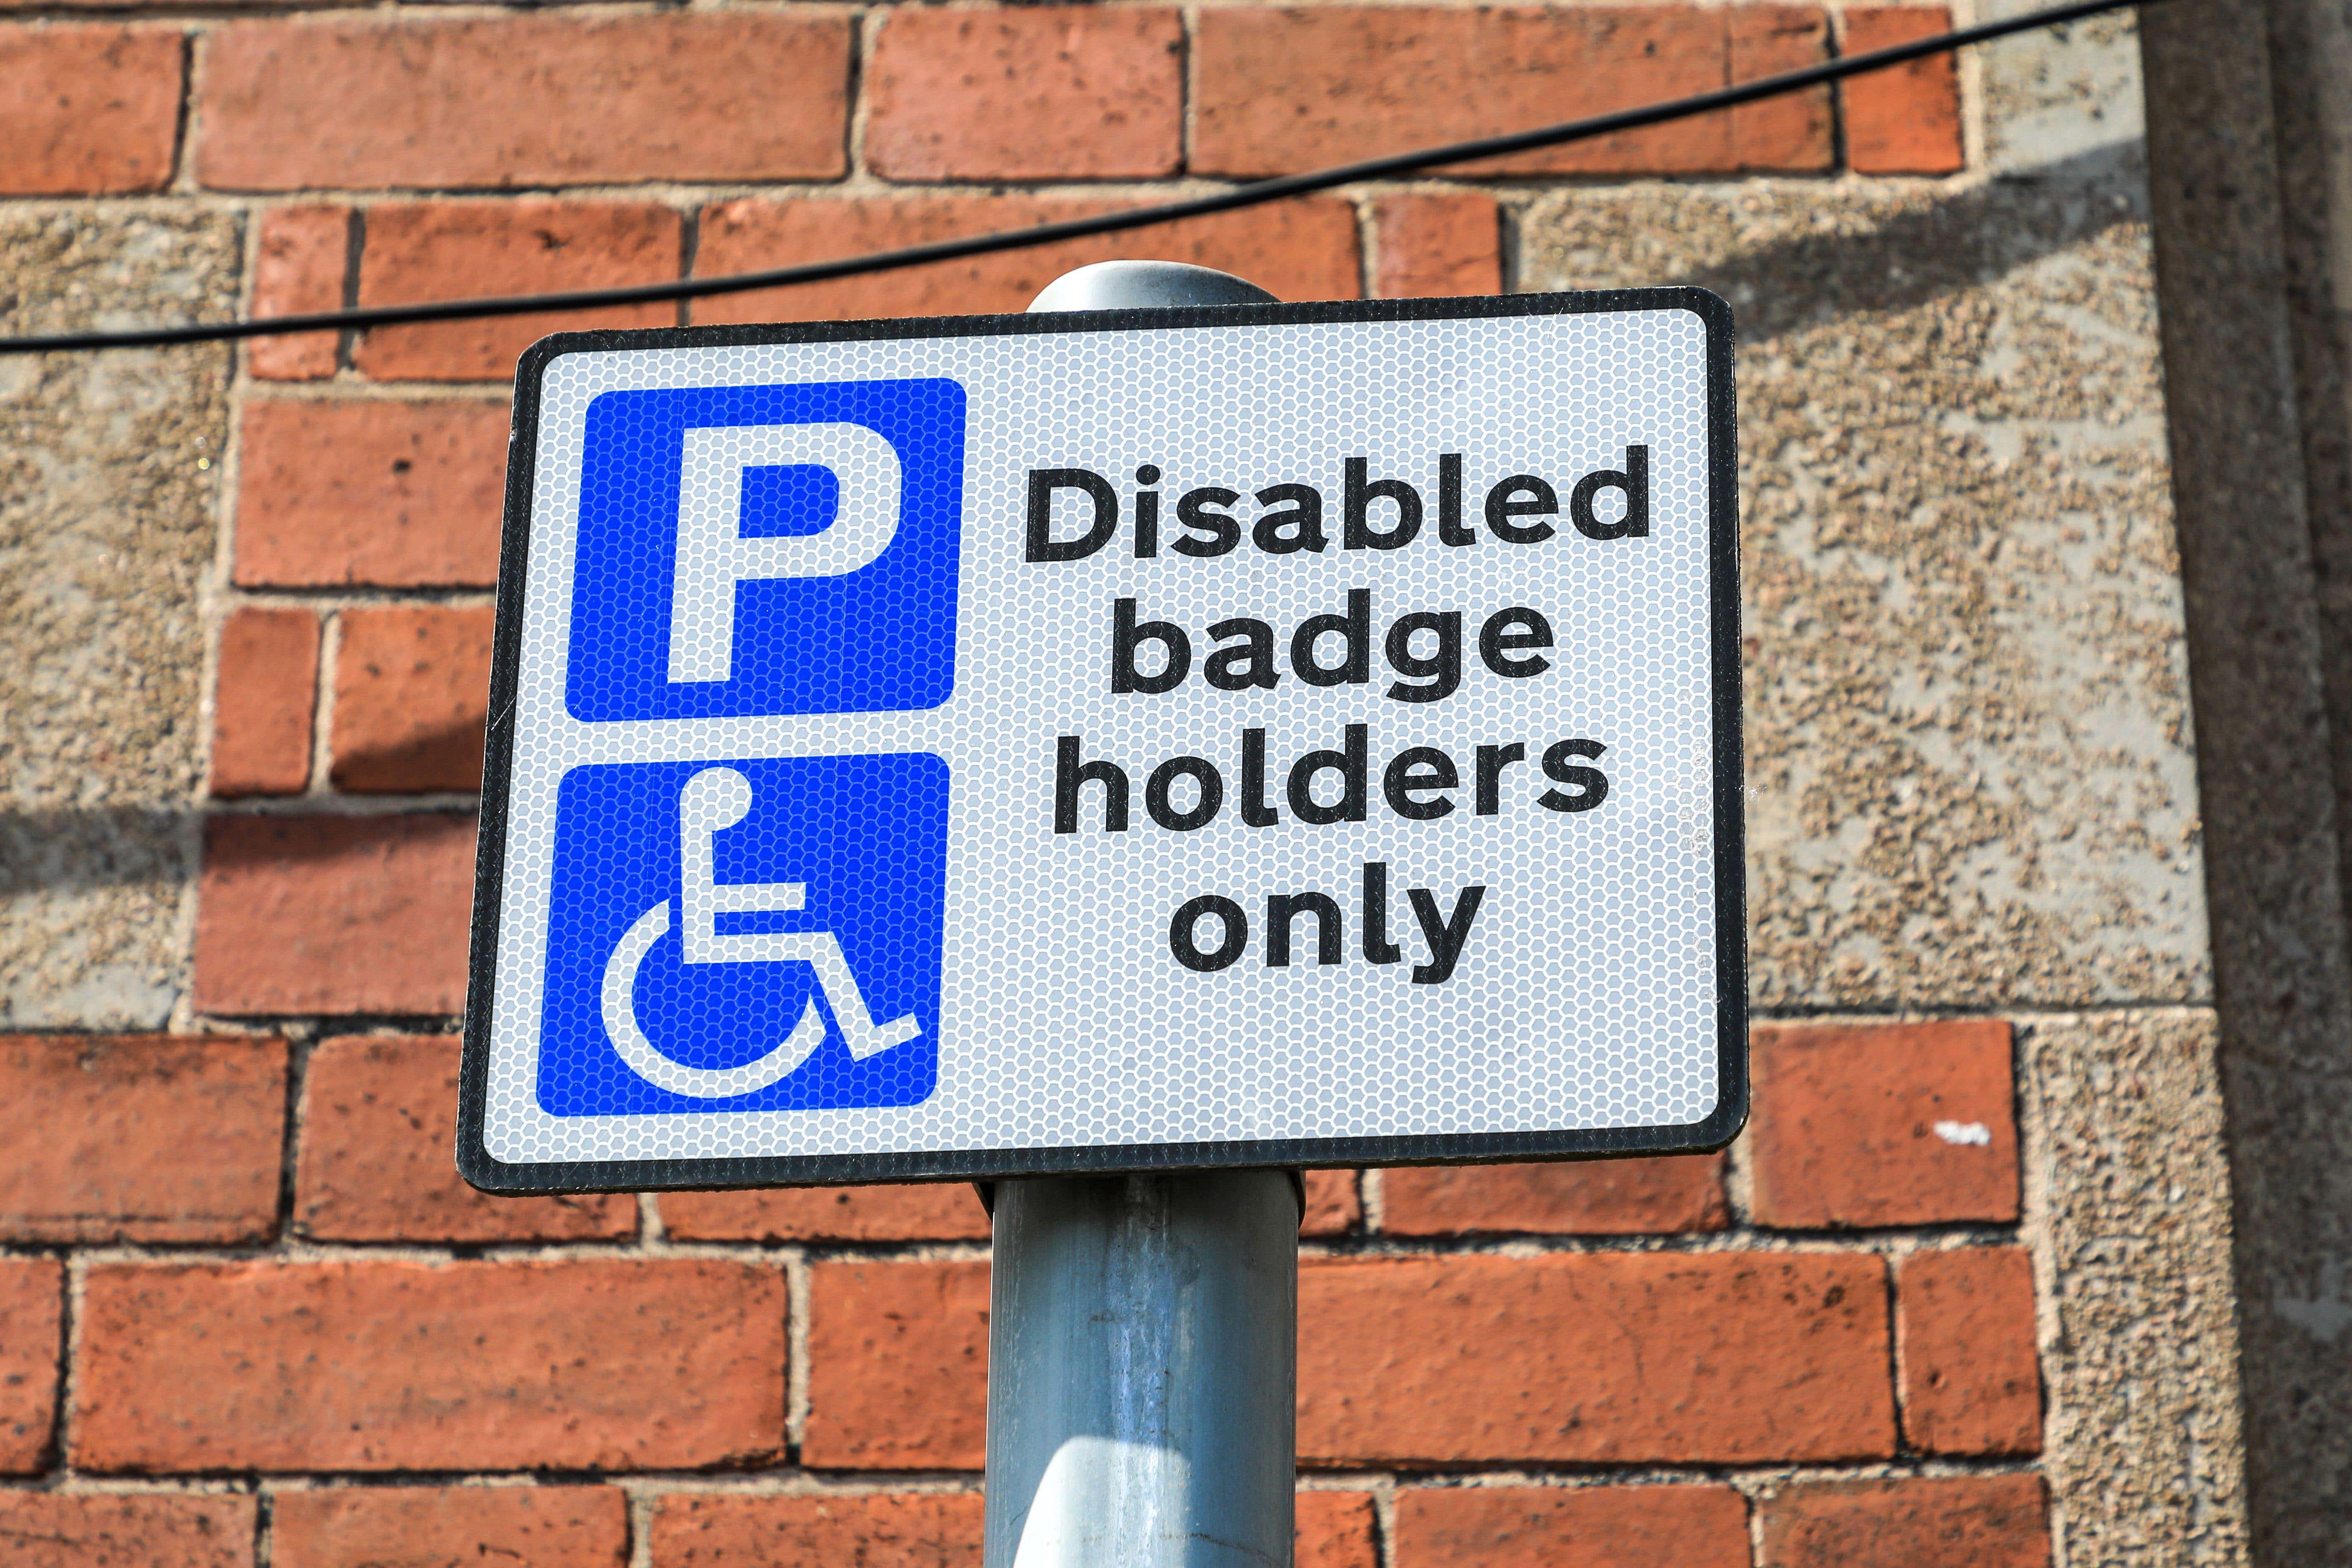 Blue badges are currently only available for children under three if they require ‘bulky medical equipment’